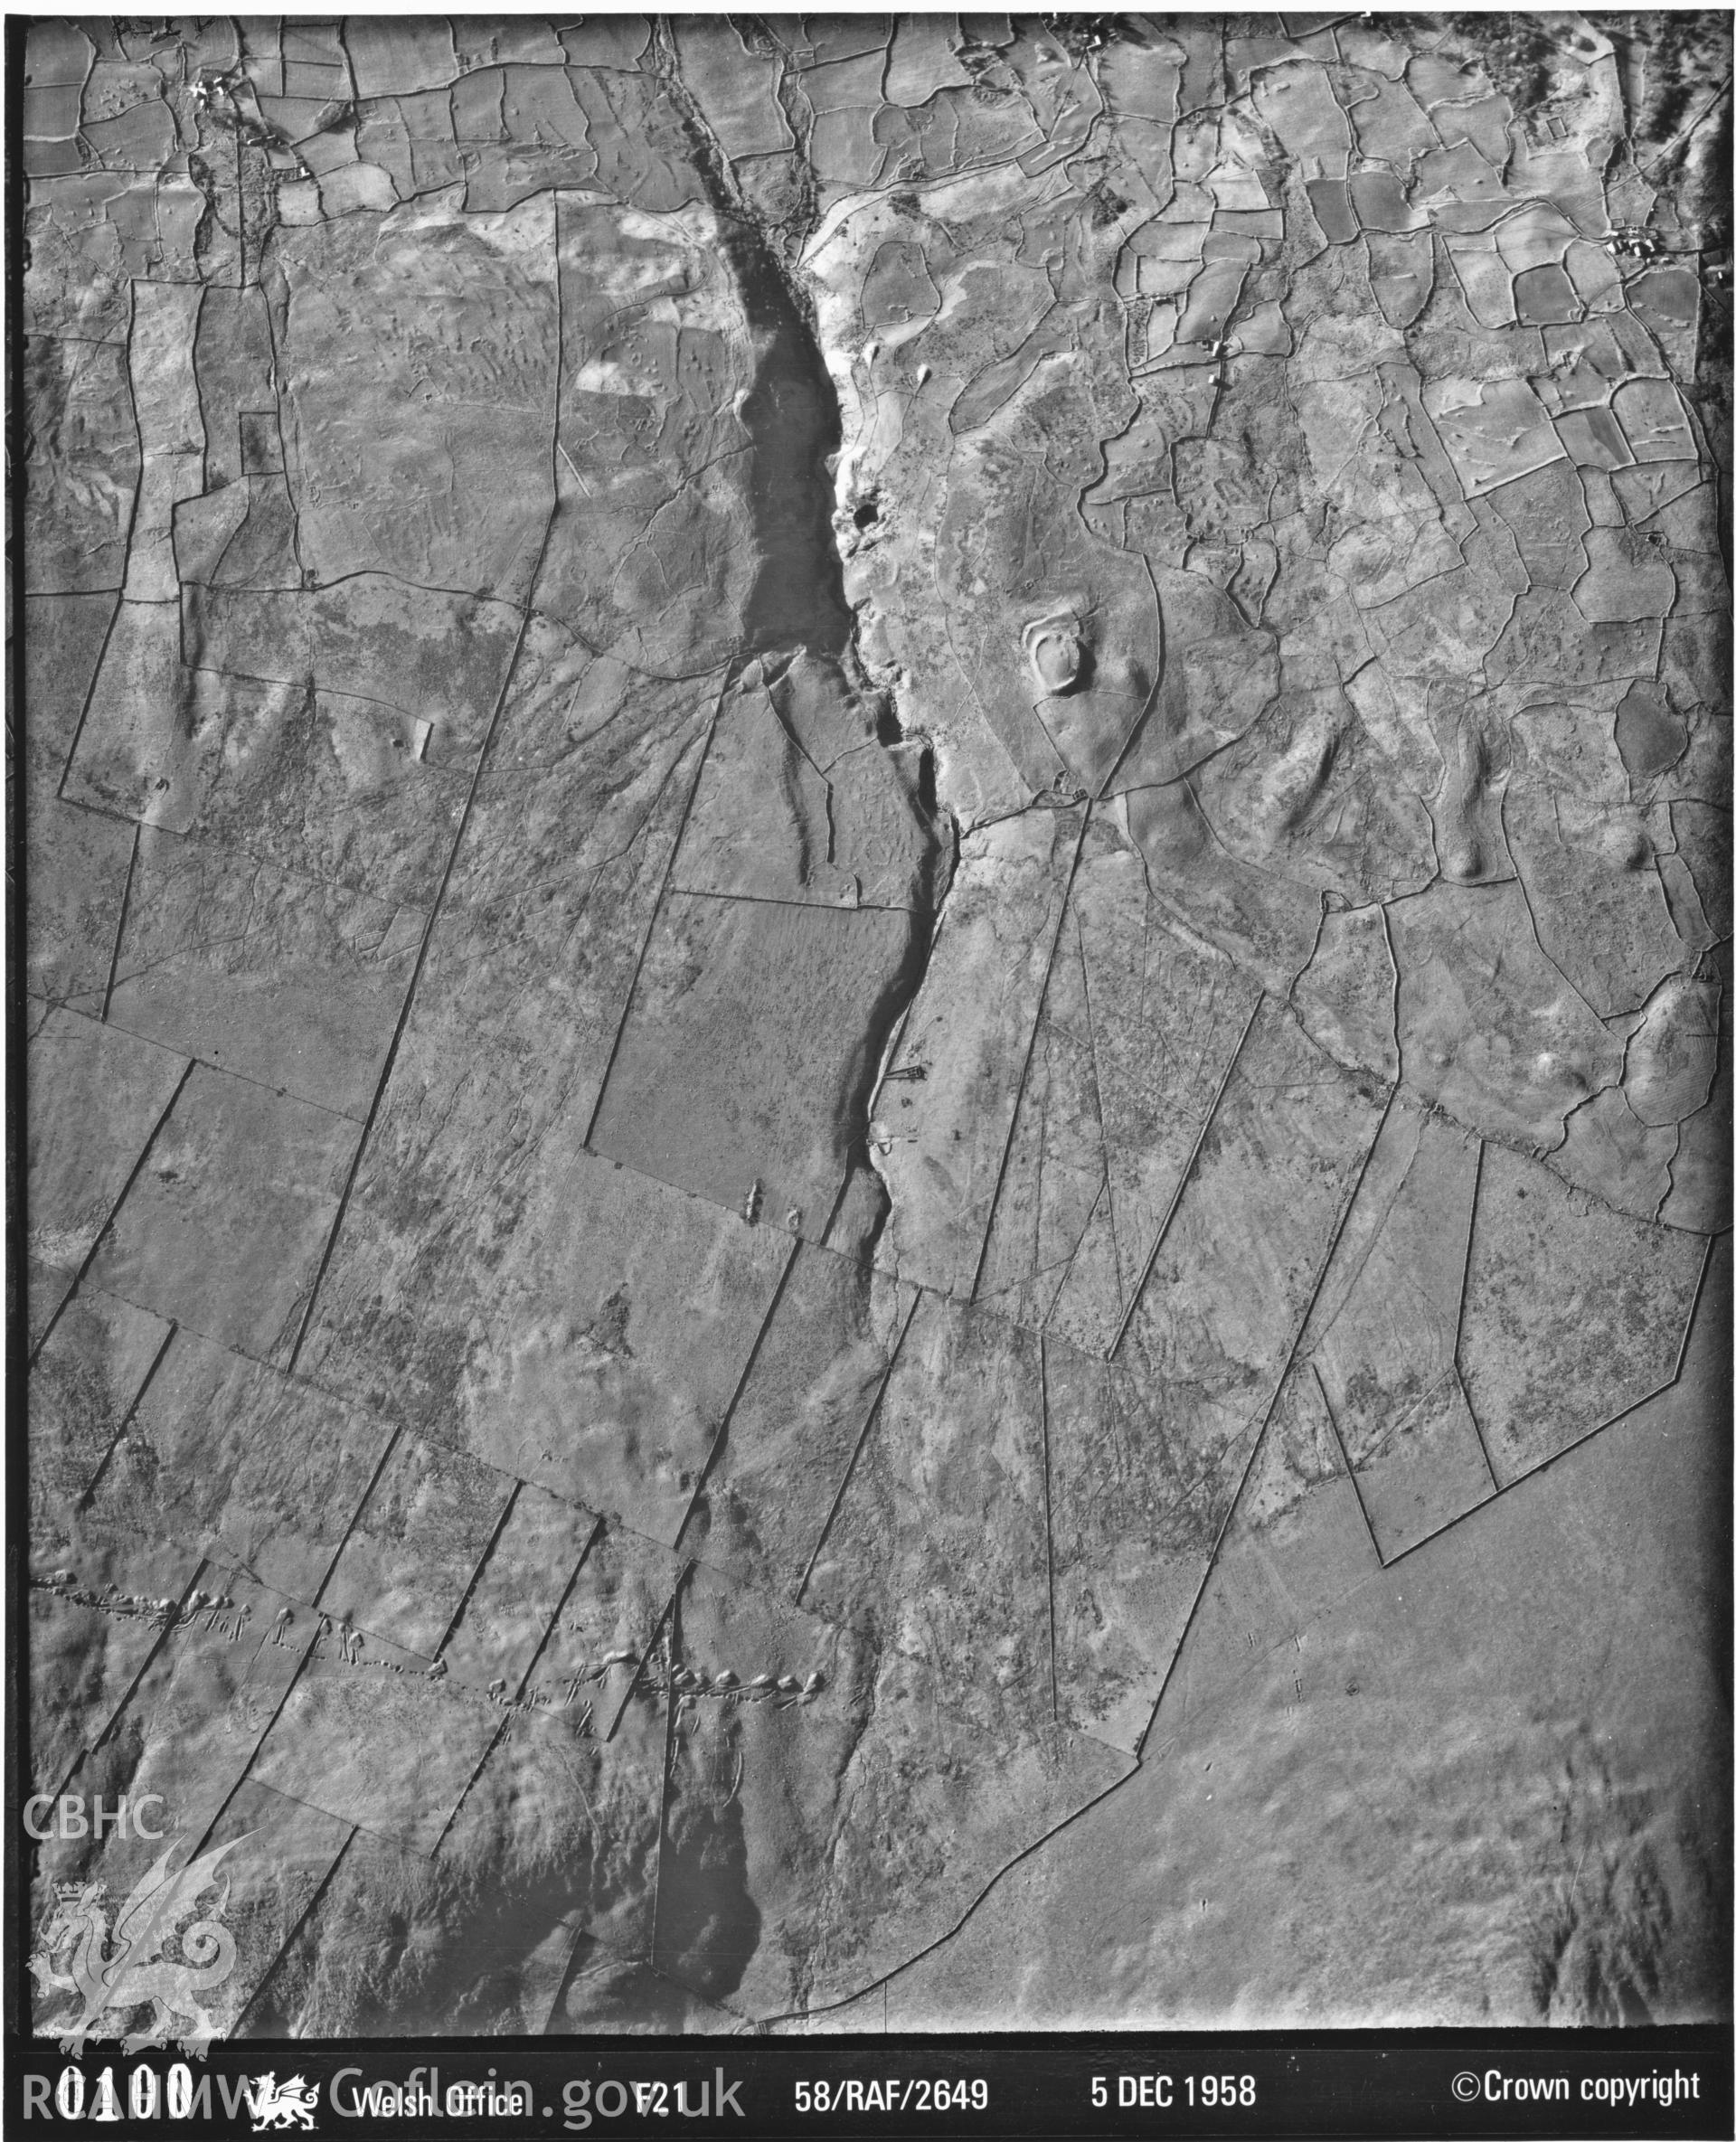 Black and white vertical aerial photograph taken by the RAF in 1958, centred on SH6020. The photograph includes Pen y Dinas, Dyffryn Ardudwy.